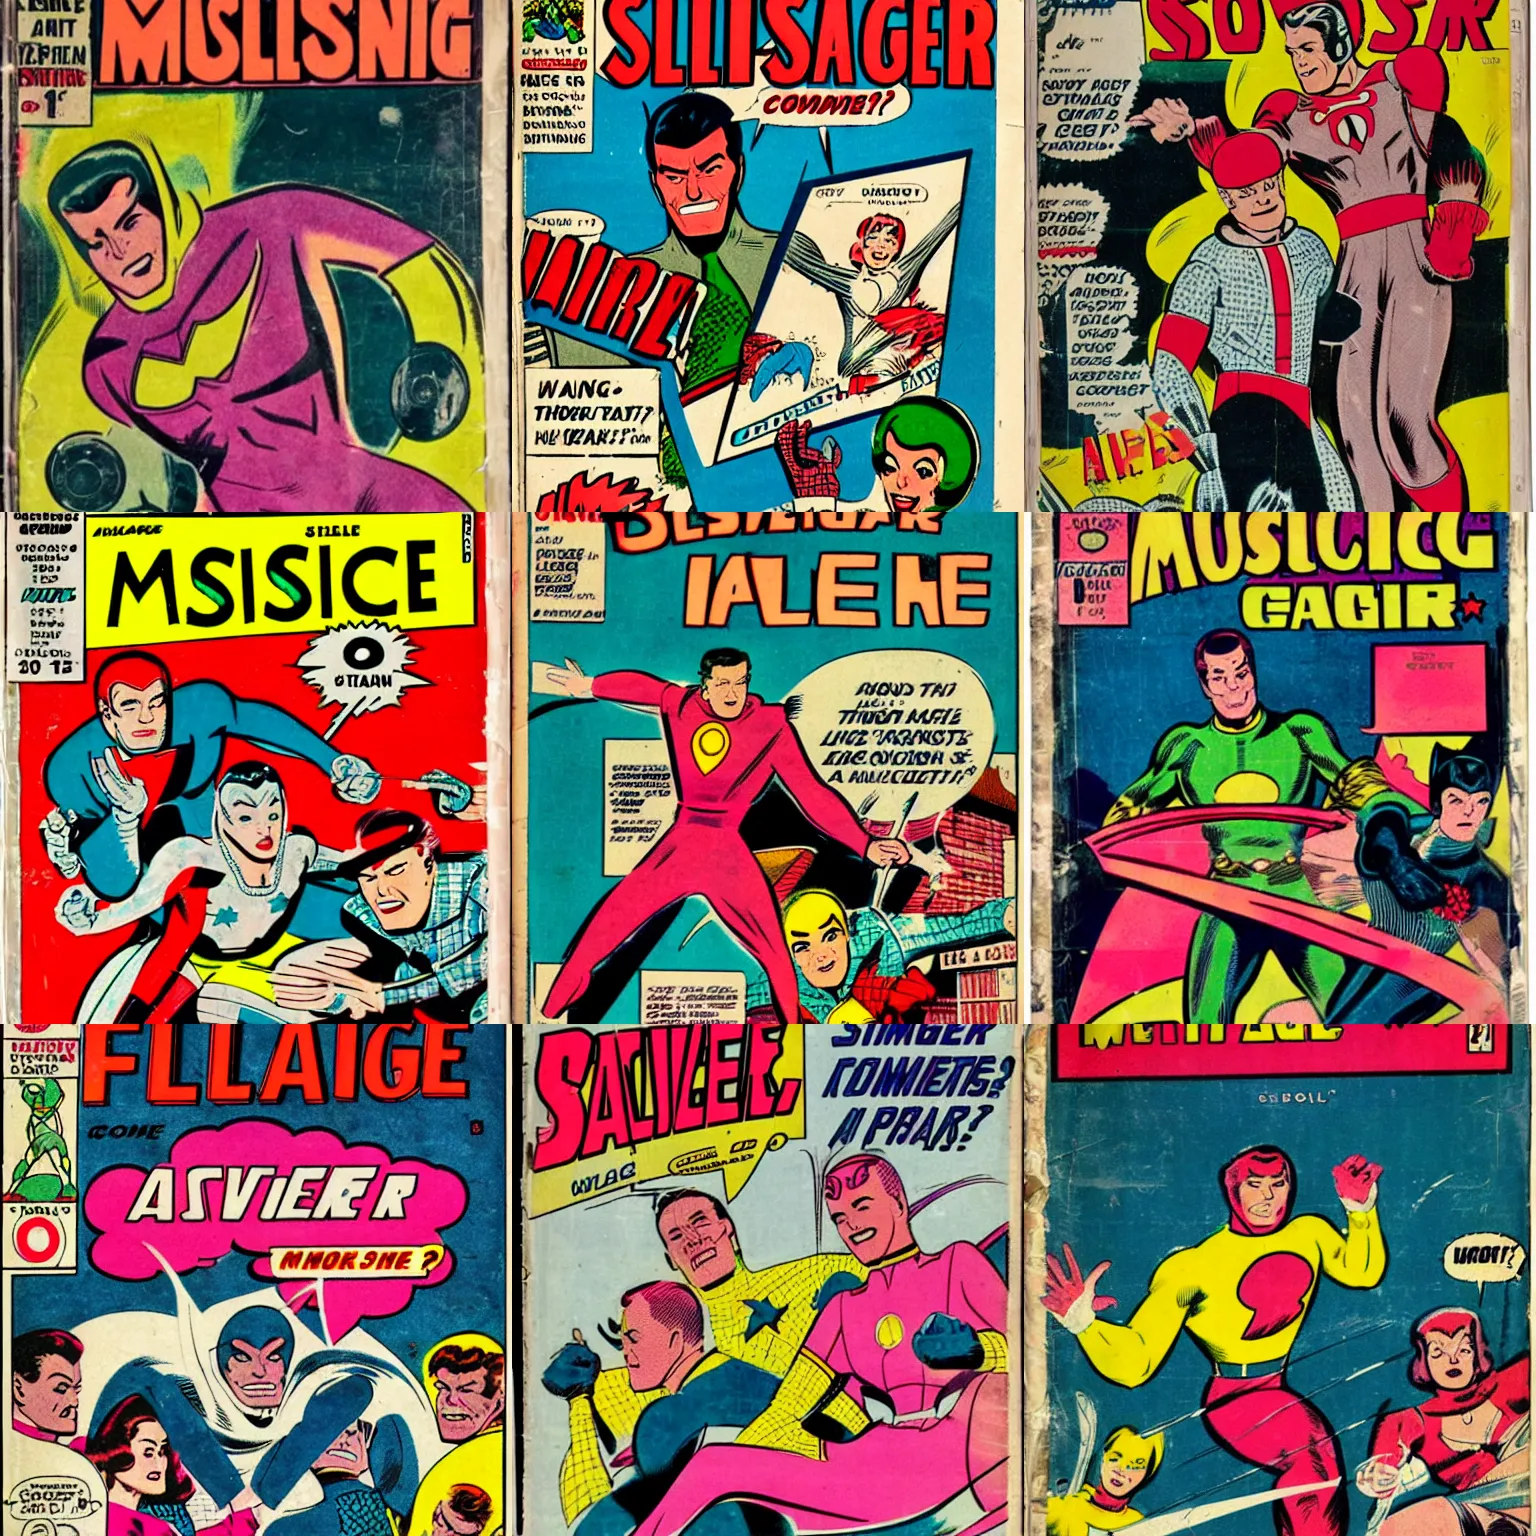 Prompt: Misleading silver age comic cover